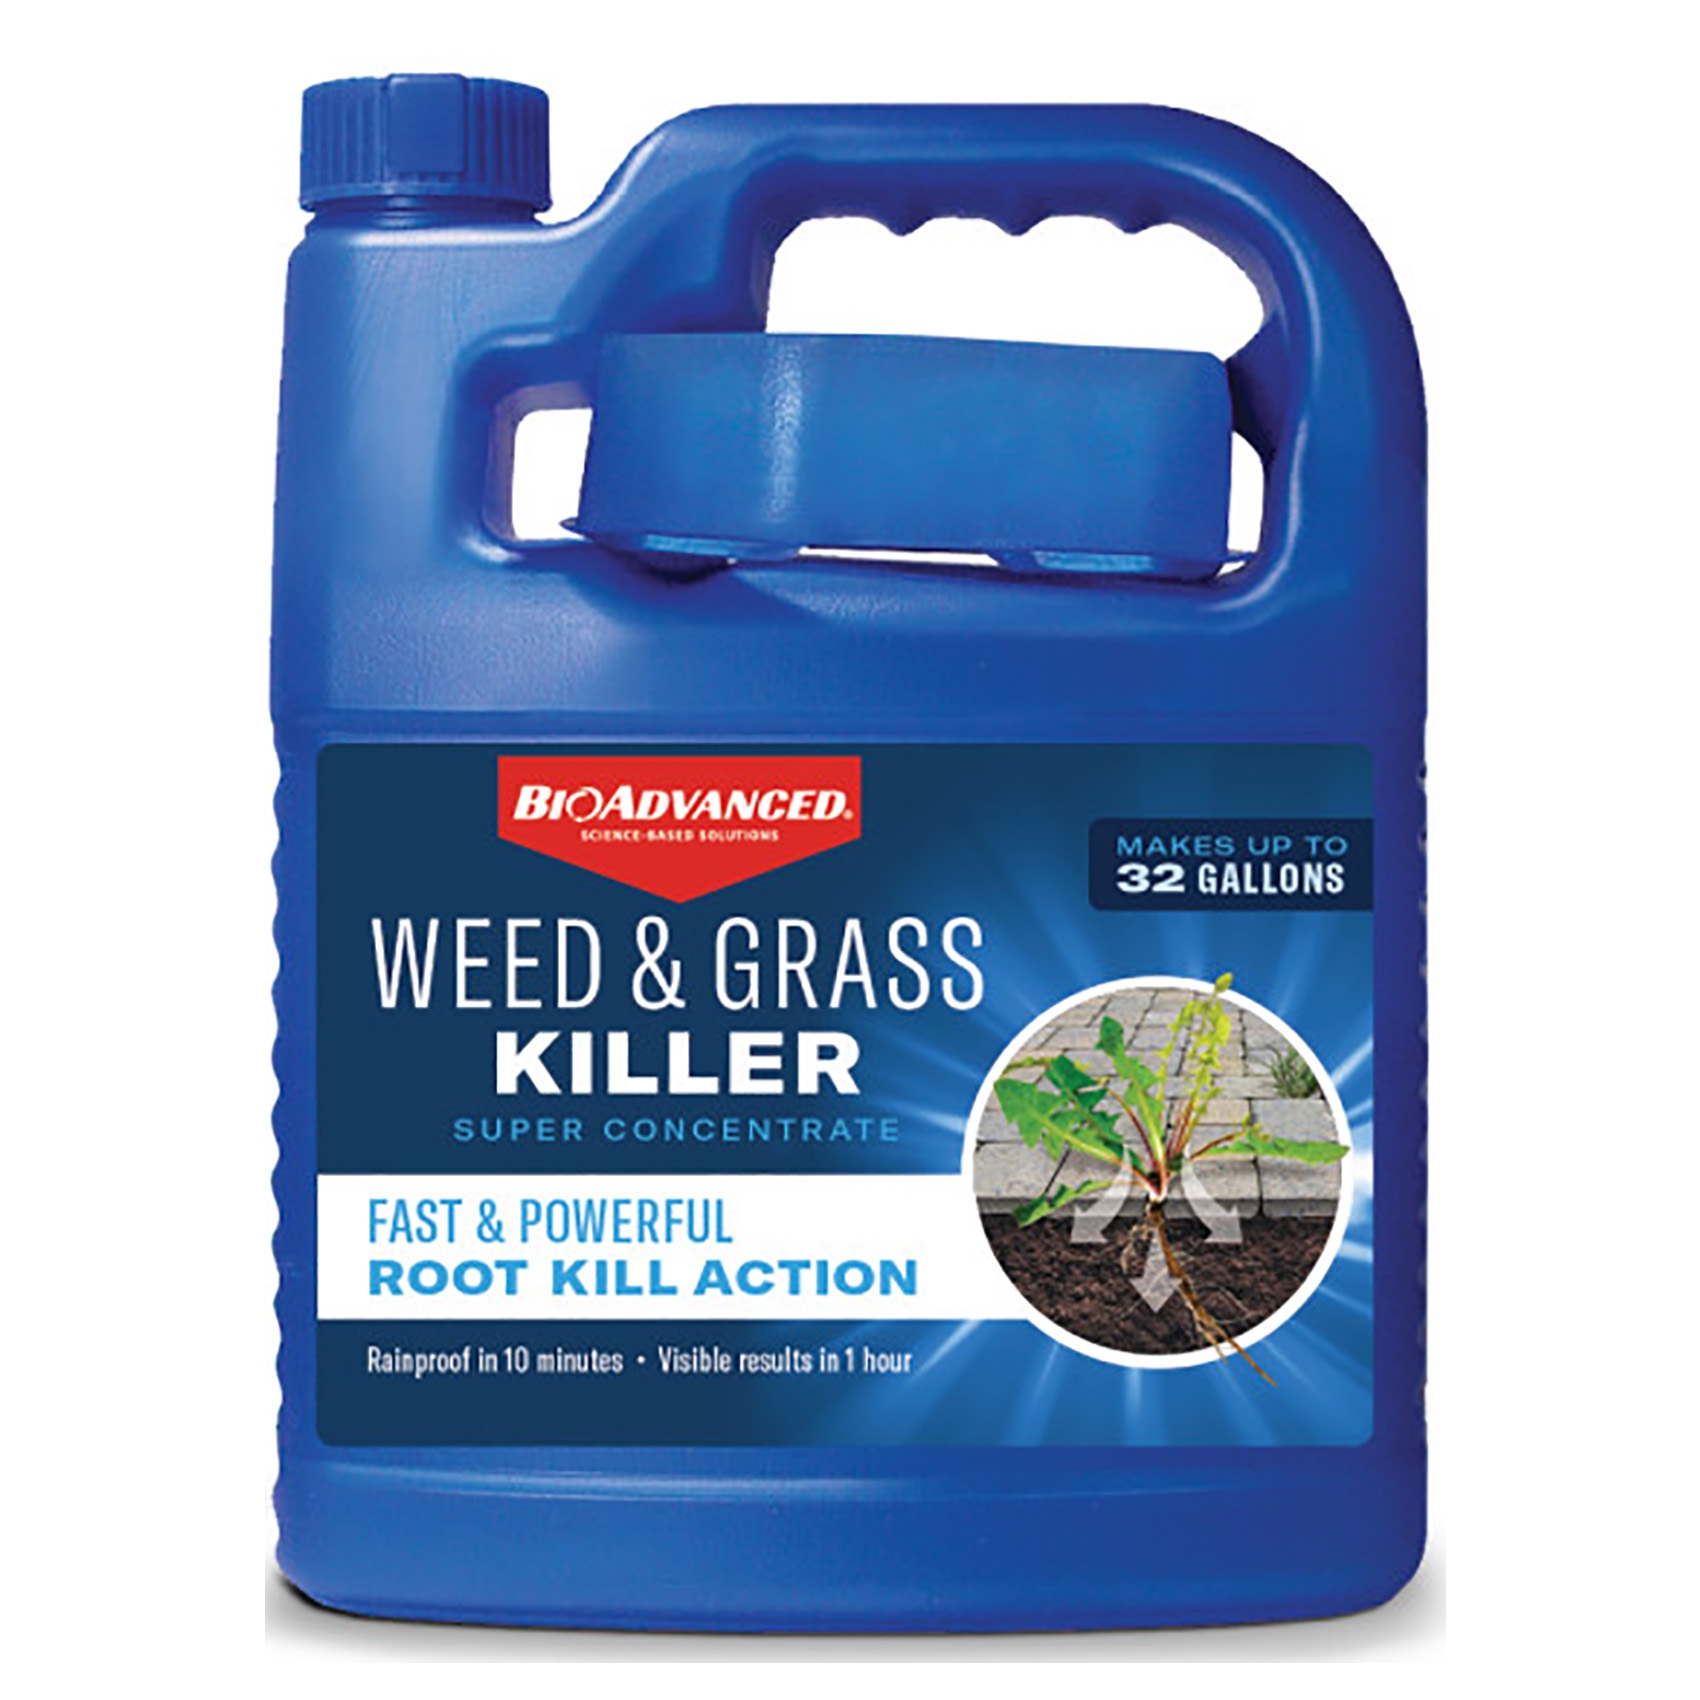 704196A Super Concentrated Weed and Grass Killer, Liquid, Blue, 64 oz Bottle